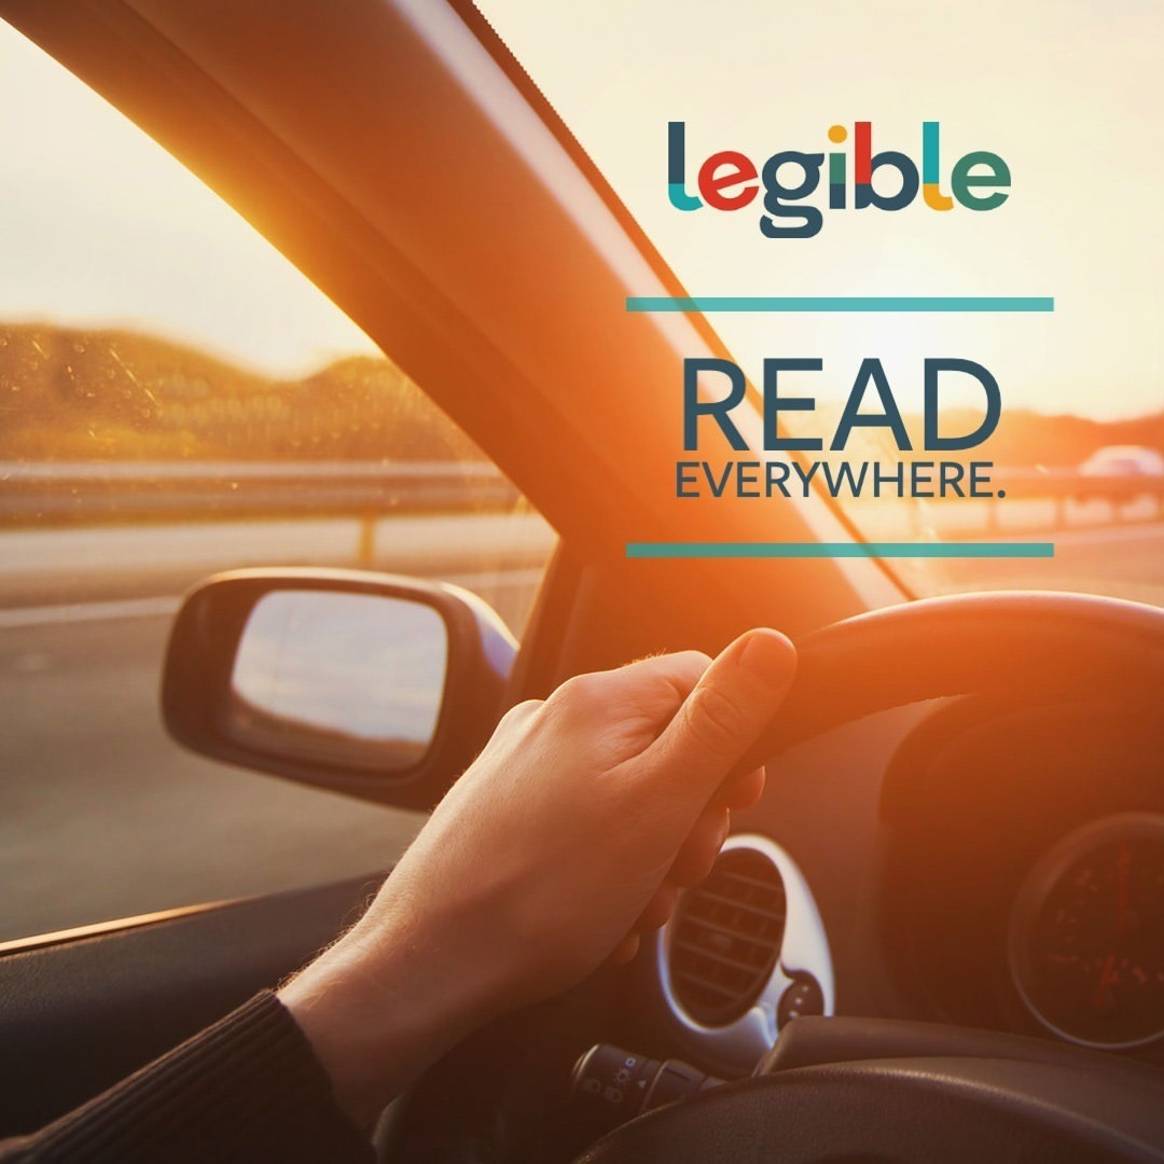 Legible is pioneering a browser-based, mobile-first digital reading and publishing system that solves key challenges faced by readers, publishers, and authors.